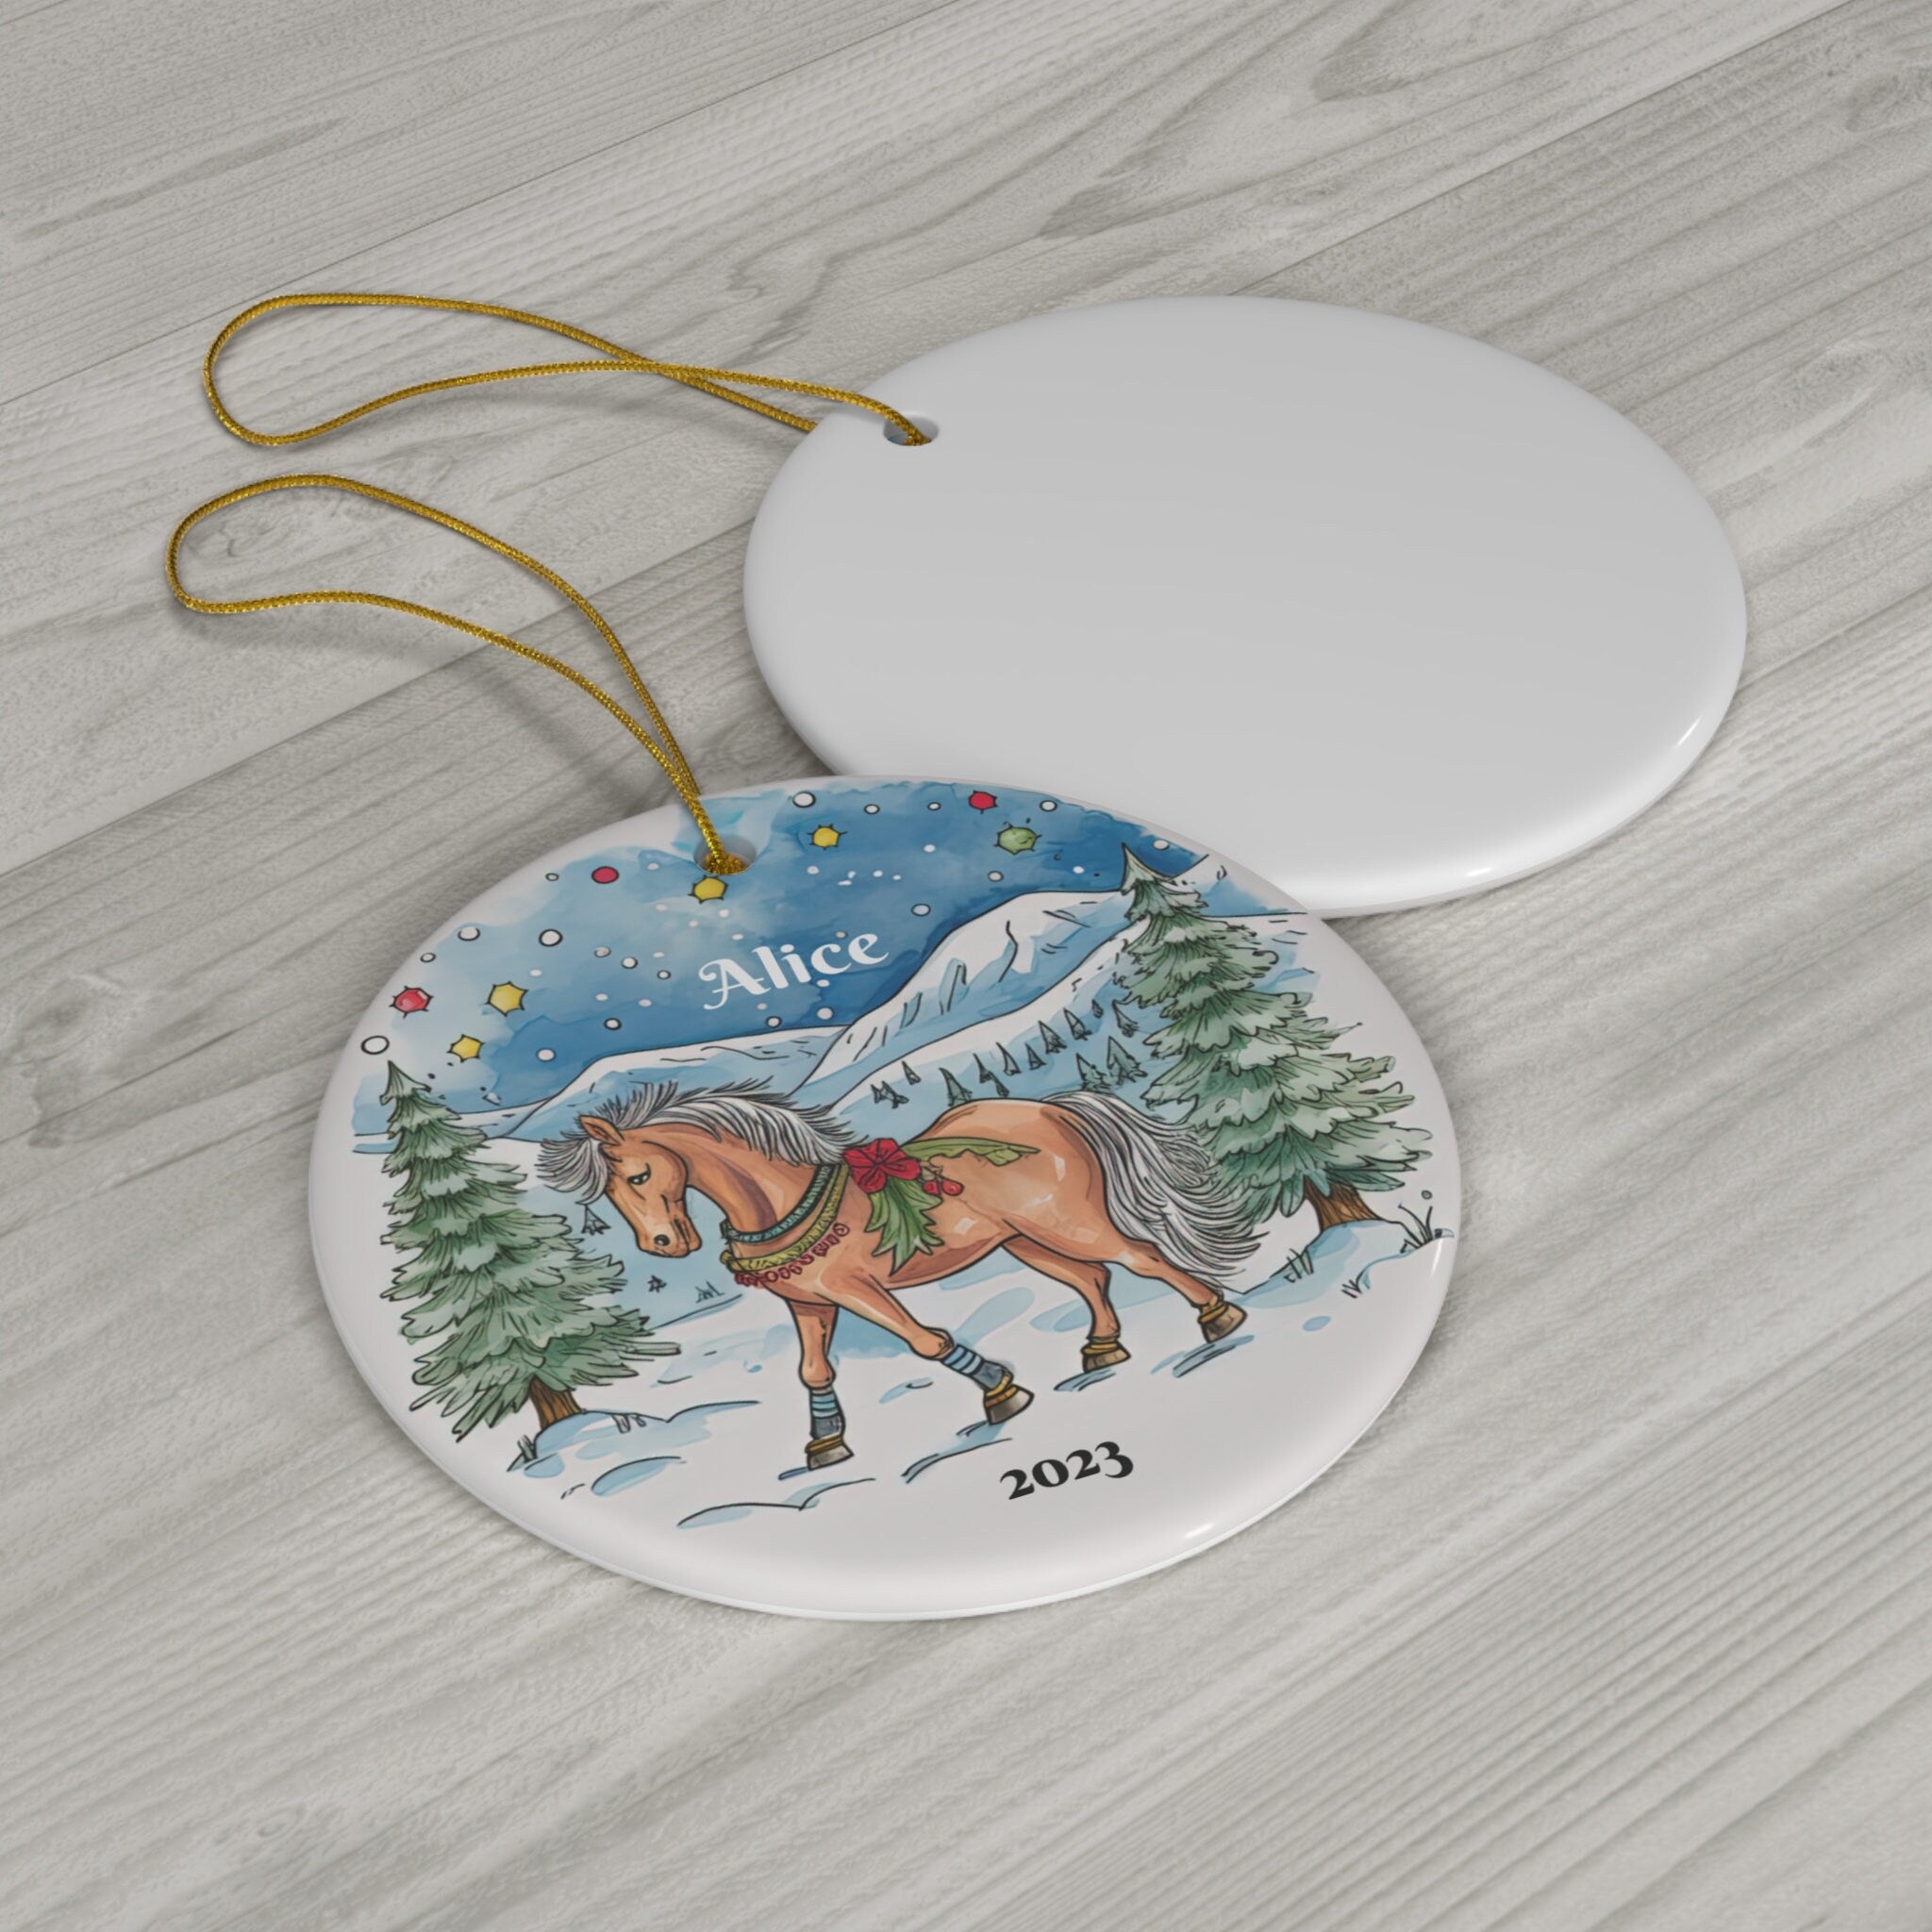 Personalized Horse & Snow Ornament